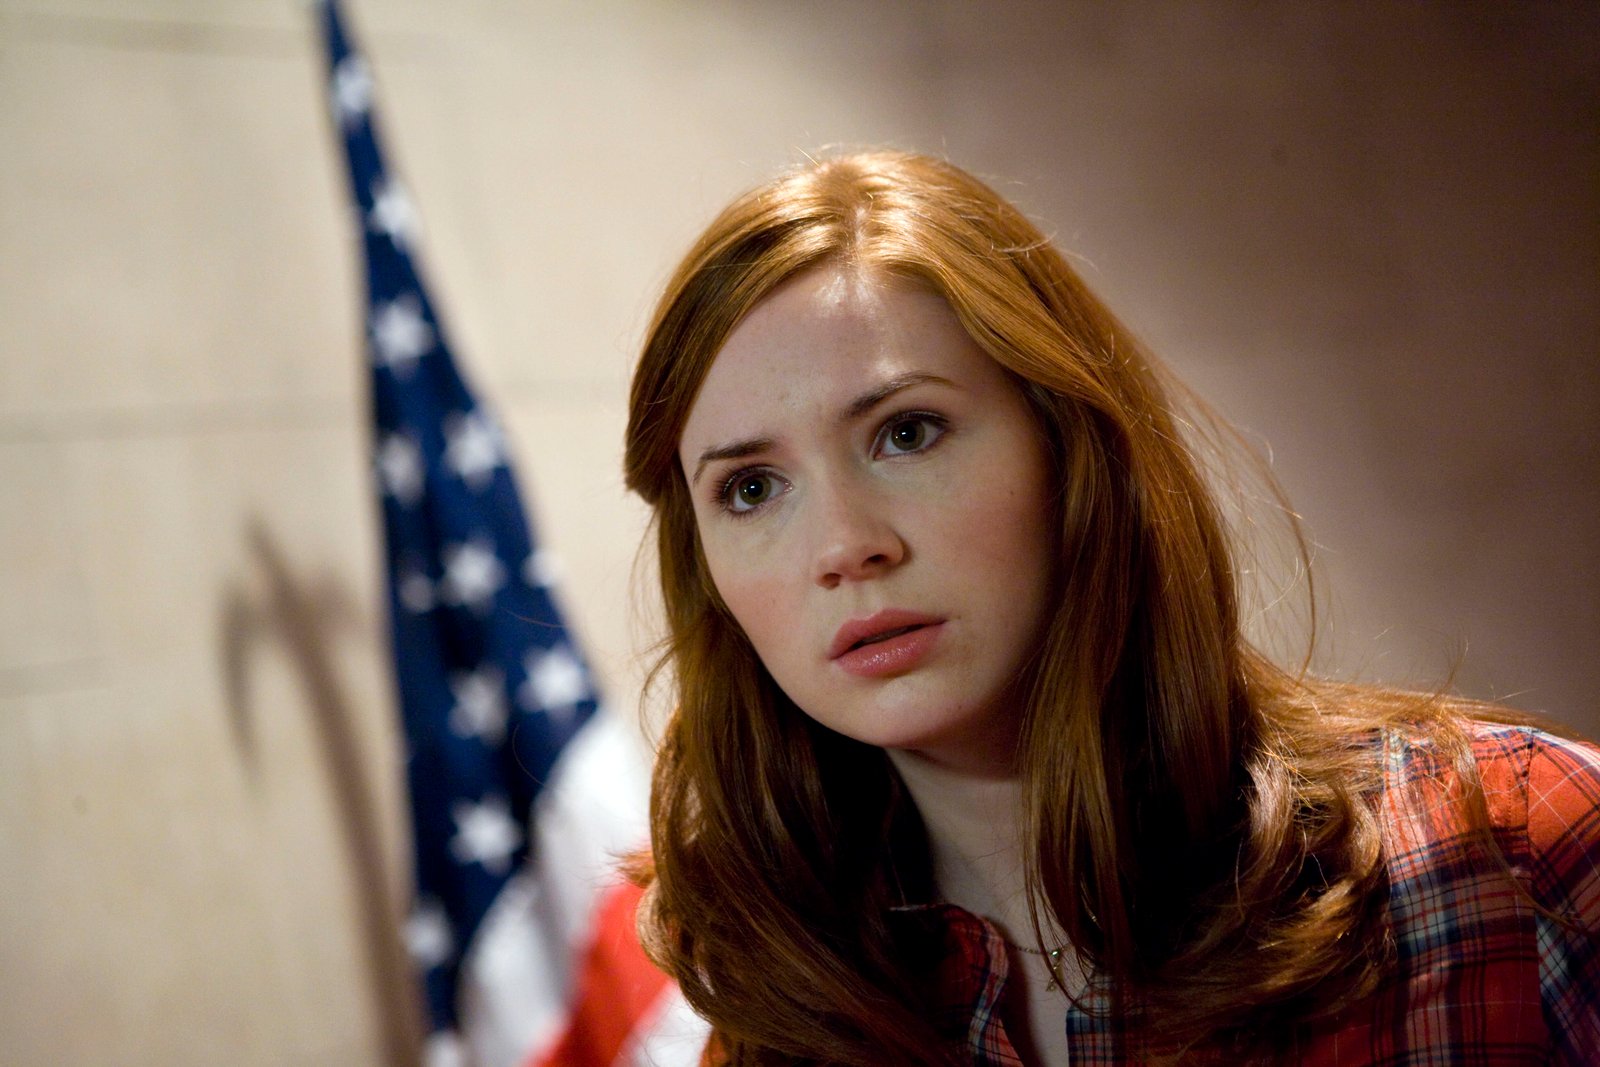 Amy Pond in the White House